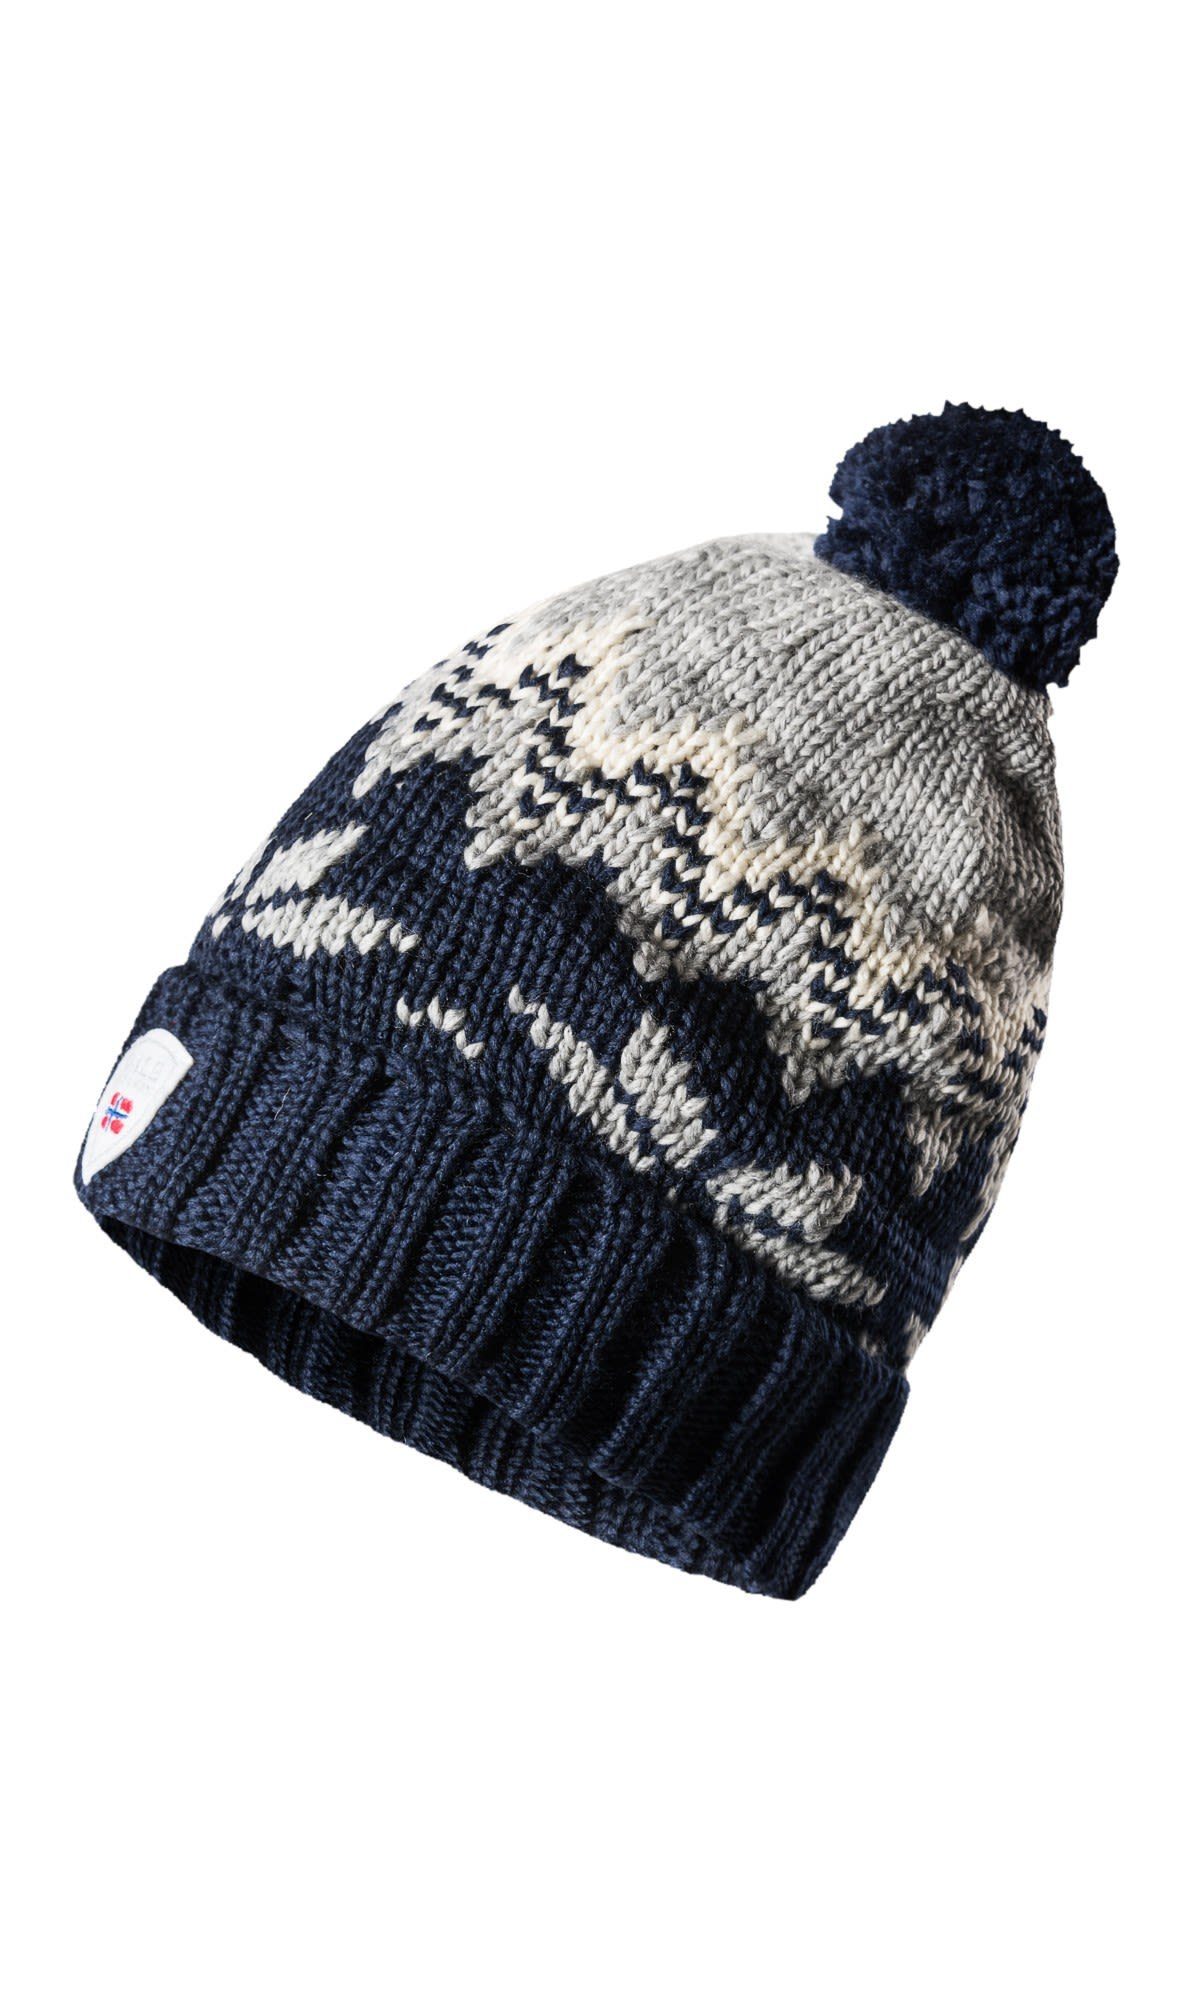 of Norway Dale - Myking Dale Navy Beanie Offwhite Of Norway Grey Accessoires - Hat